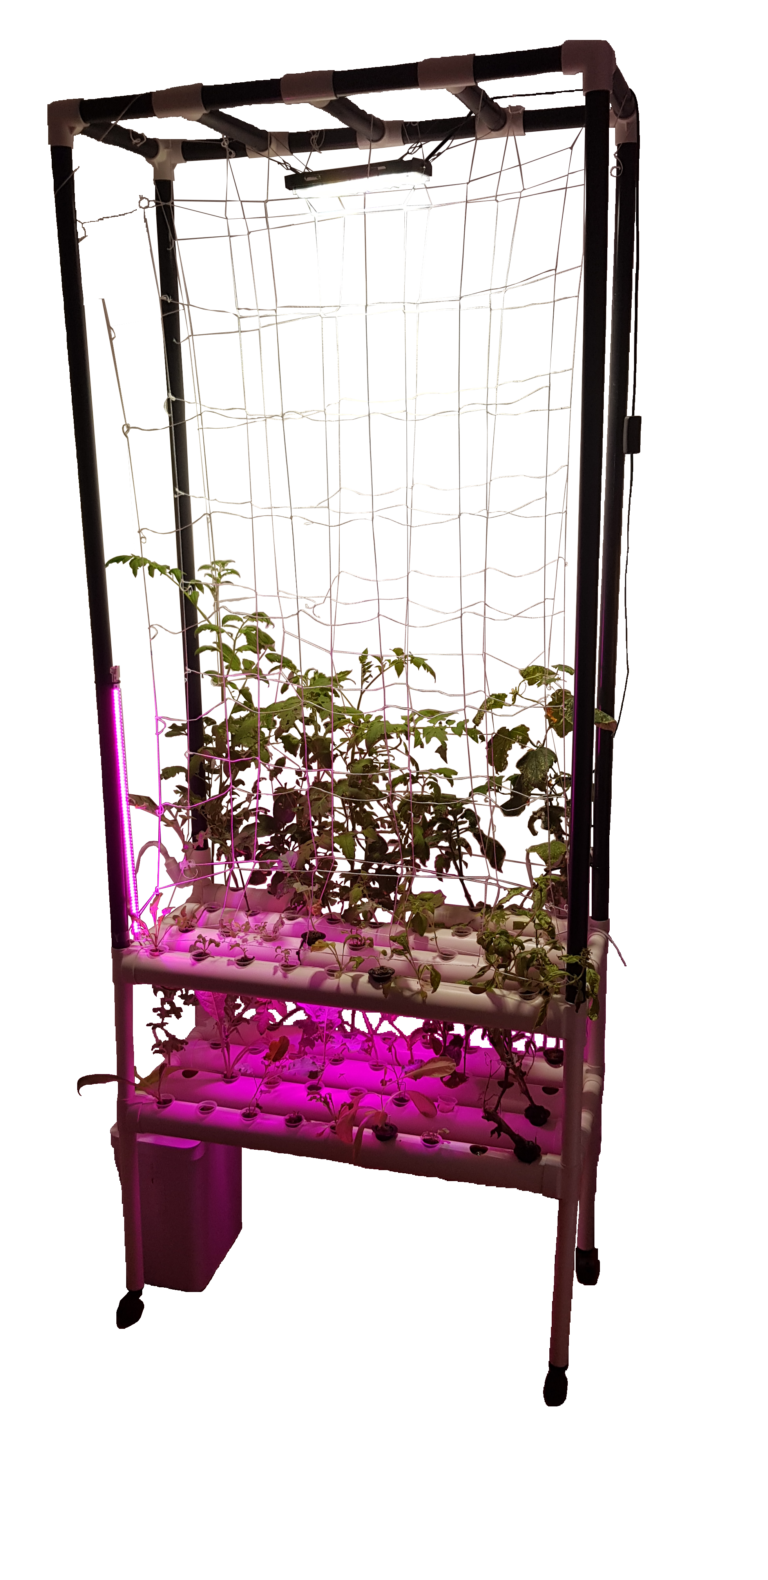 Home Hydroponic systems